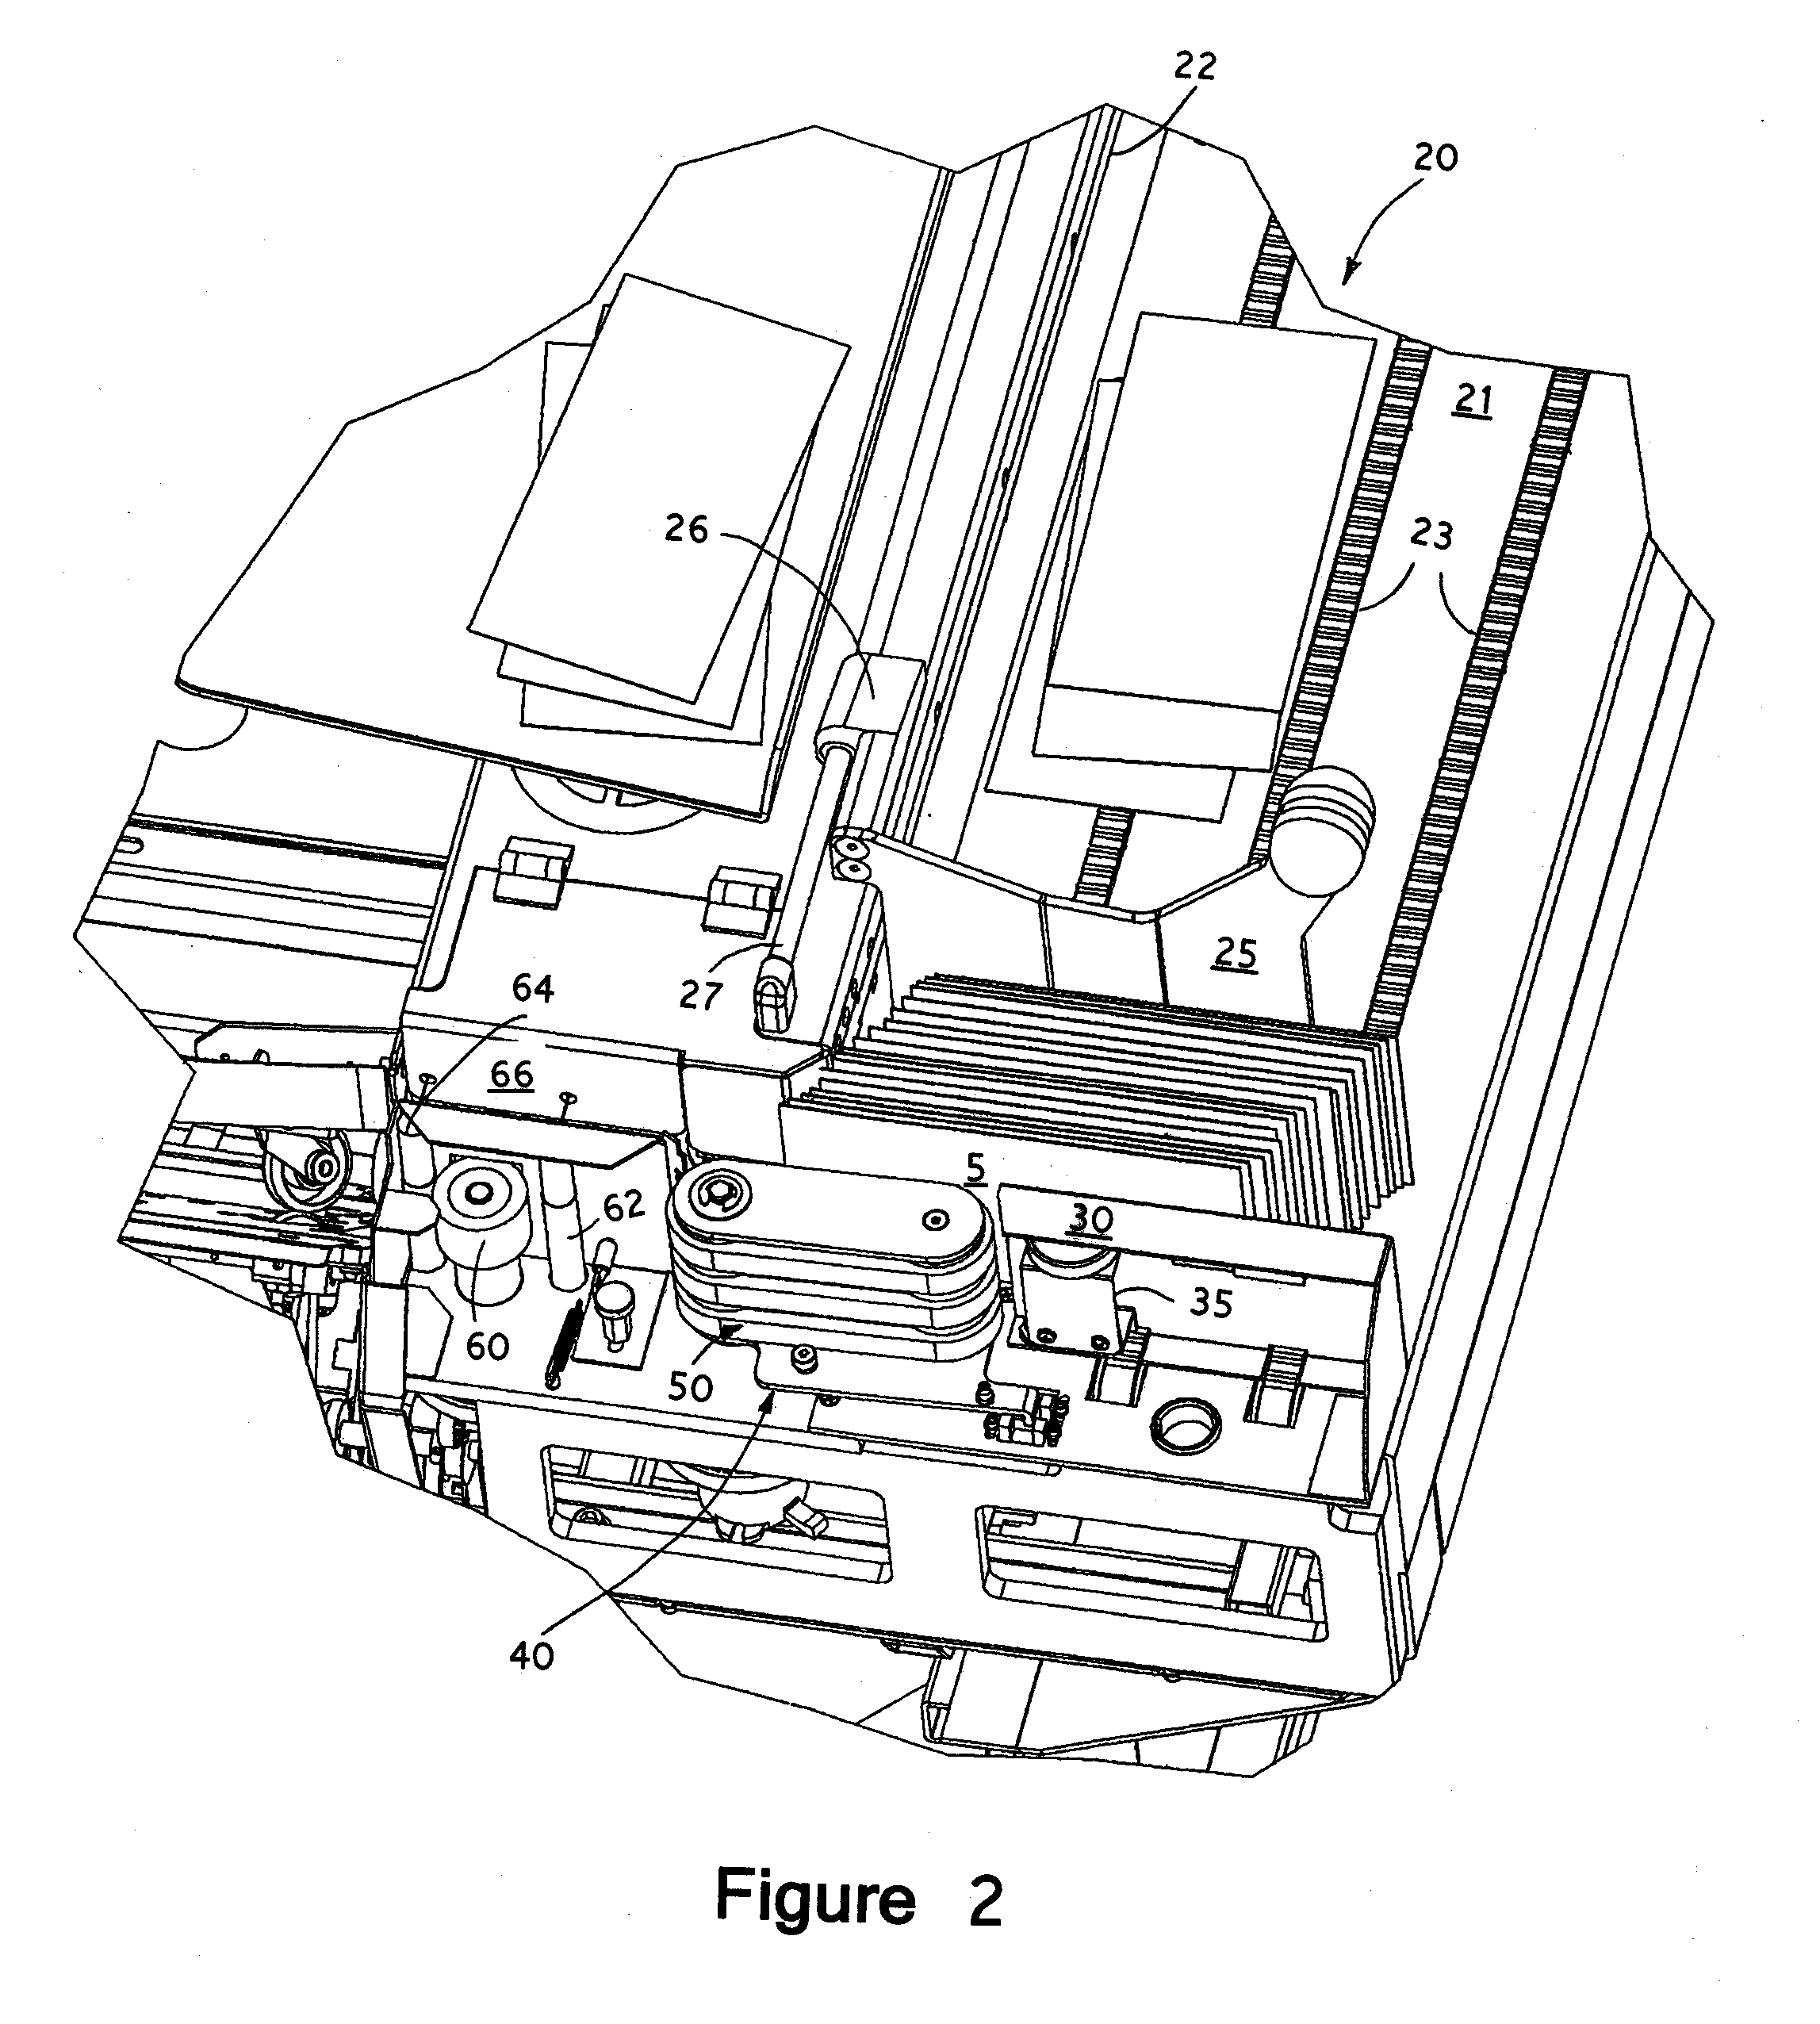 Method and Apparatus for Processing Envelopes Containing Contents